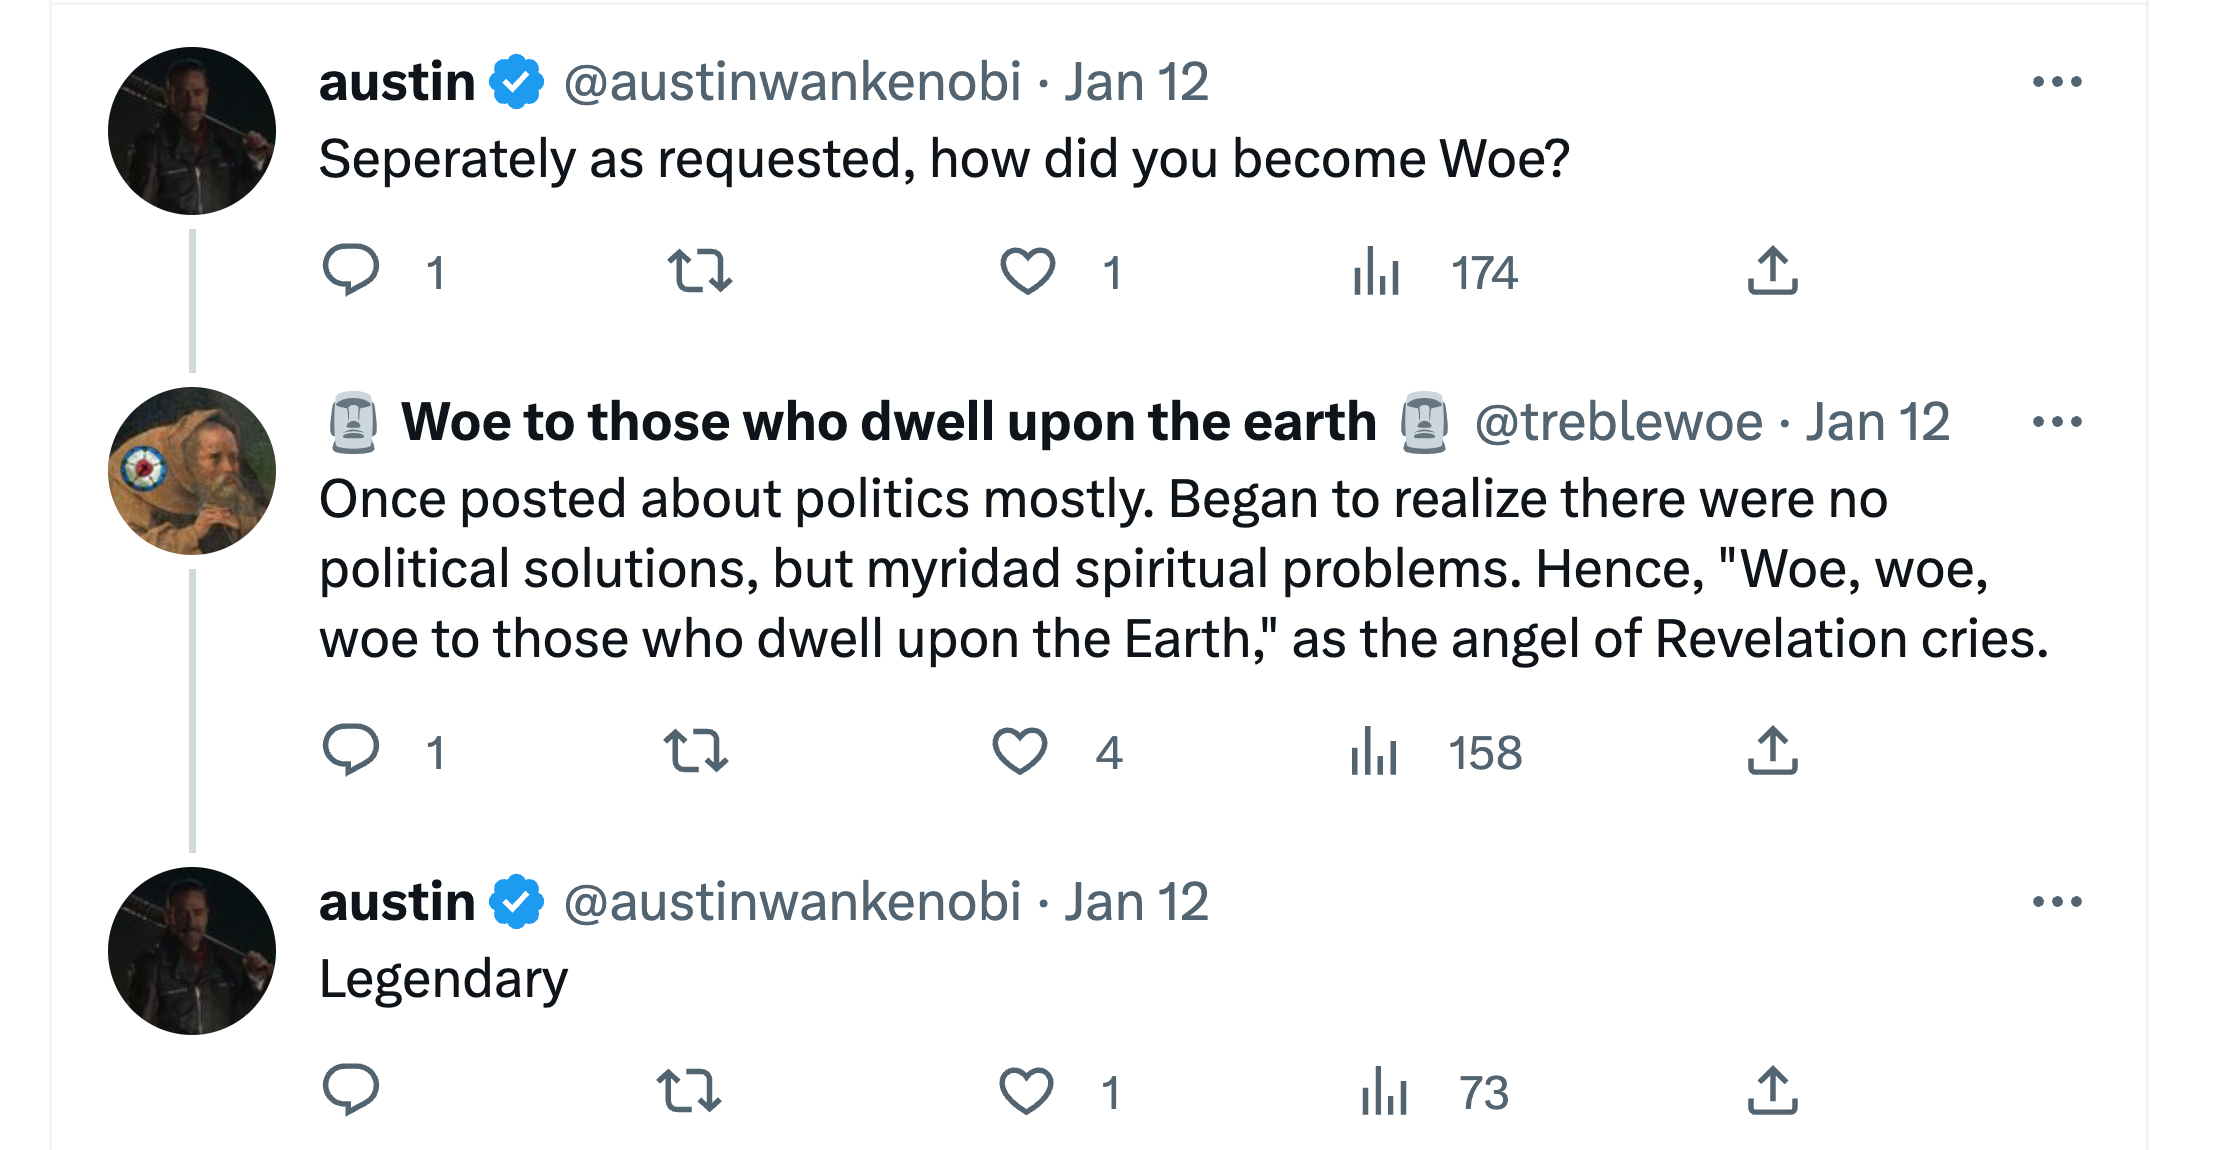 @austinwankenobi: Separately as requested, how did you become Woe?@treblewoe: Once posted about politics mostly. Began to realize there were no political solutions, but myridad (sic) spiritual problems. Hence, "Woe, woe, woe to those who dwell upon the Earth," as the angel of Revelation cries. Austin: Legendary (Jan. 12, 2023 exchange)